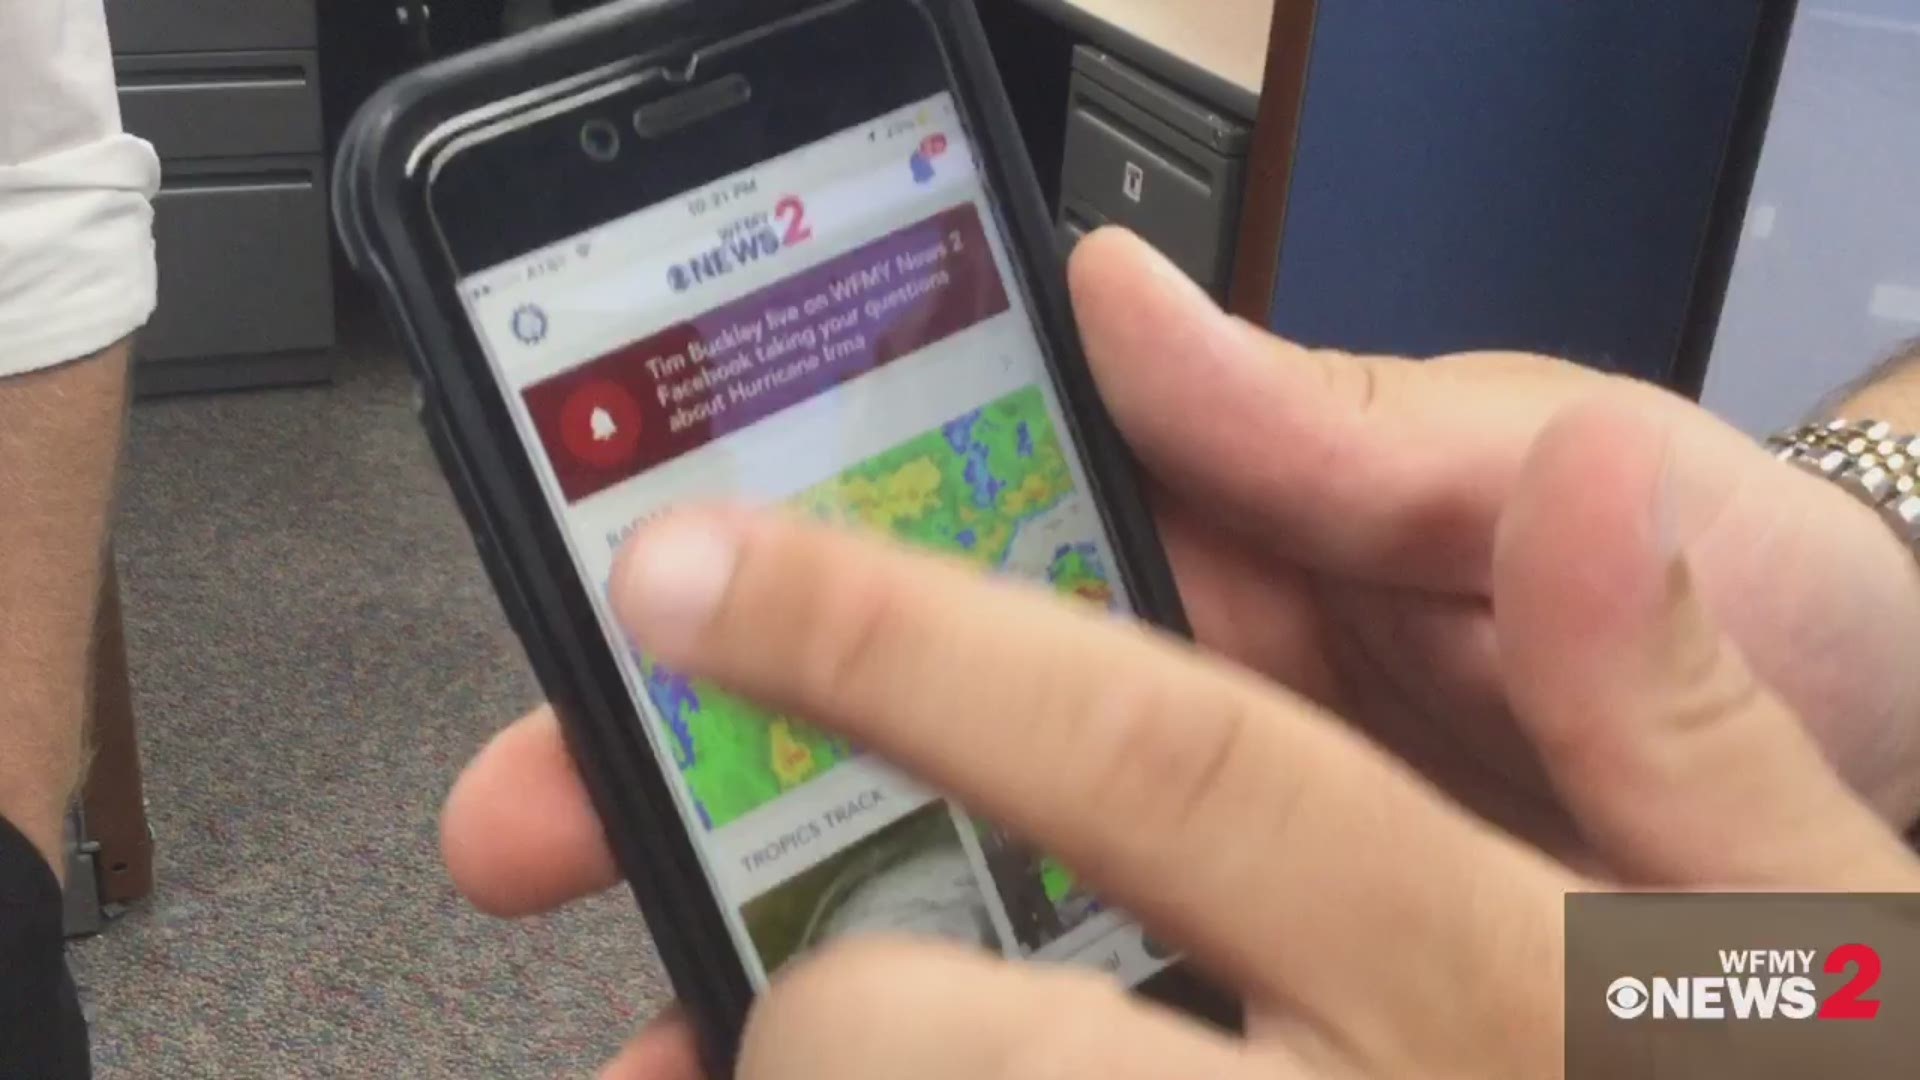 Chad Silber and Tim Buckley Show You How To Get The Latest Weather Alerts On Your Phone